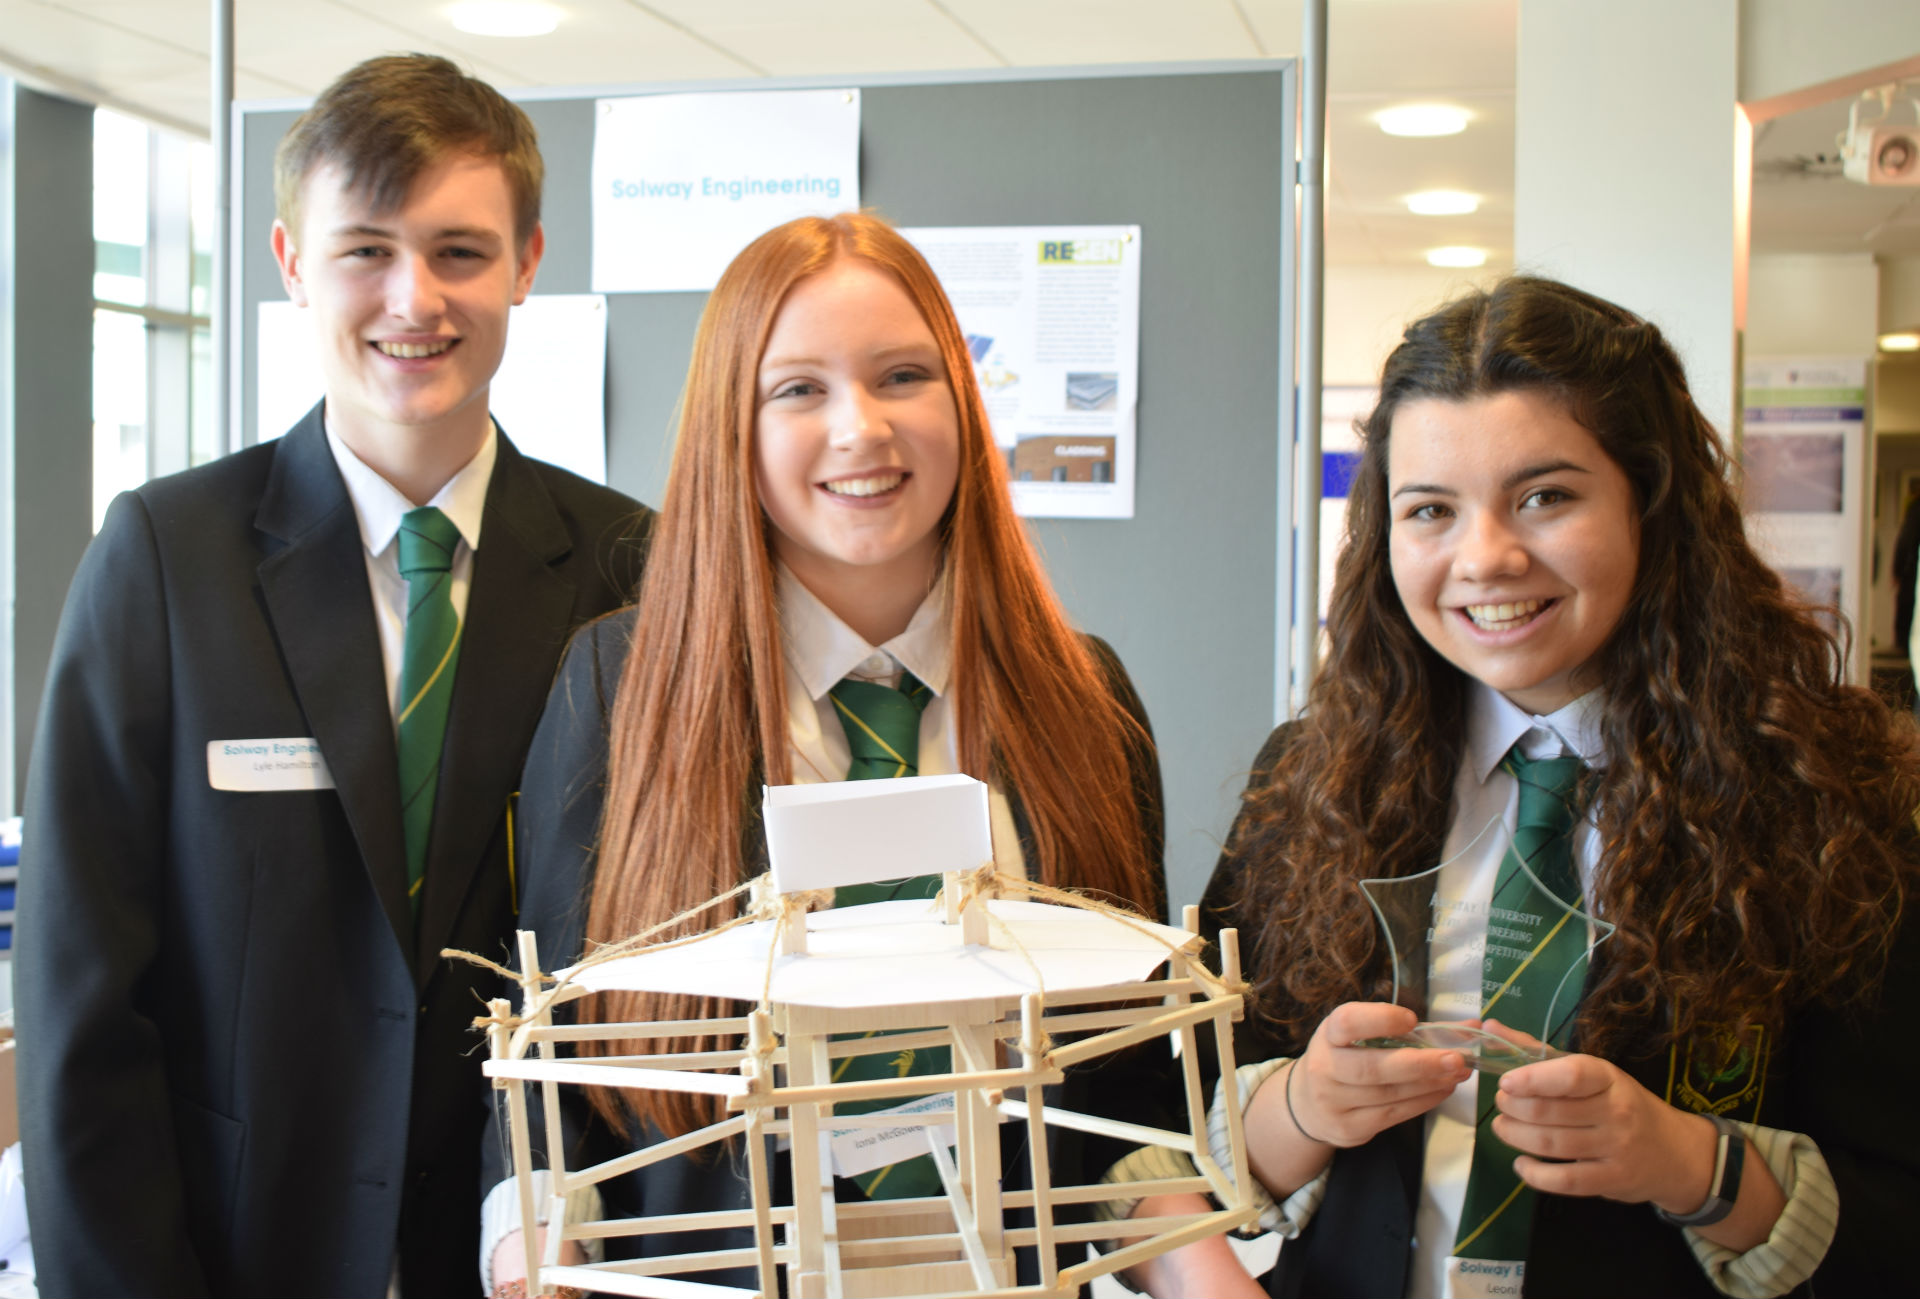 Engineering excellence at Scottish design contest